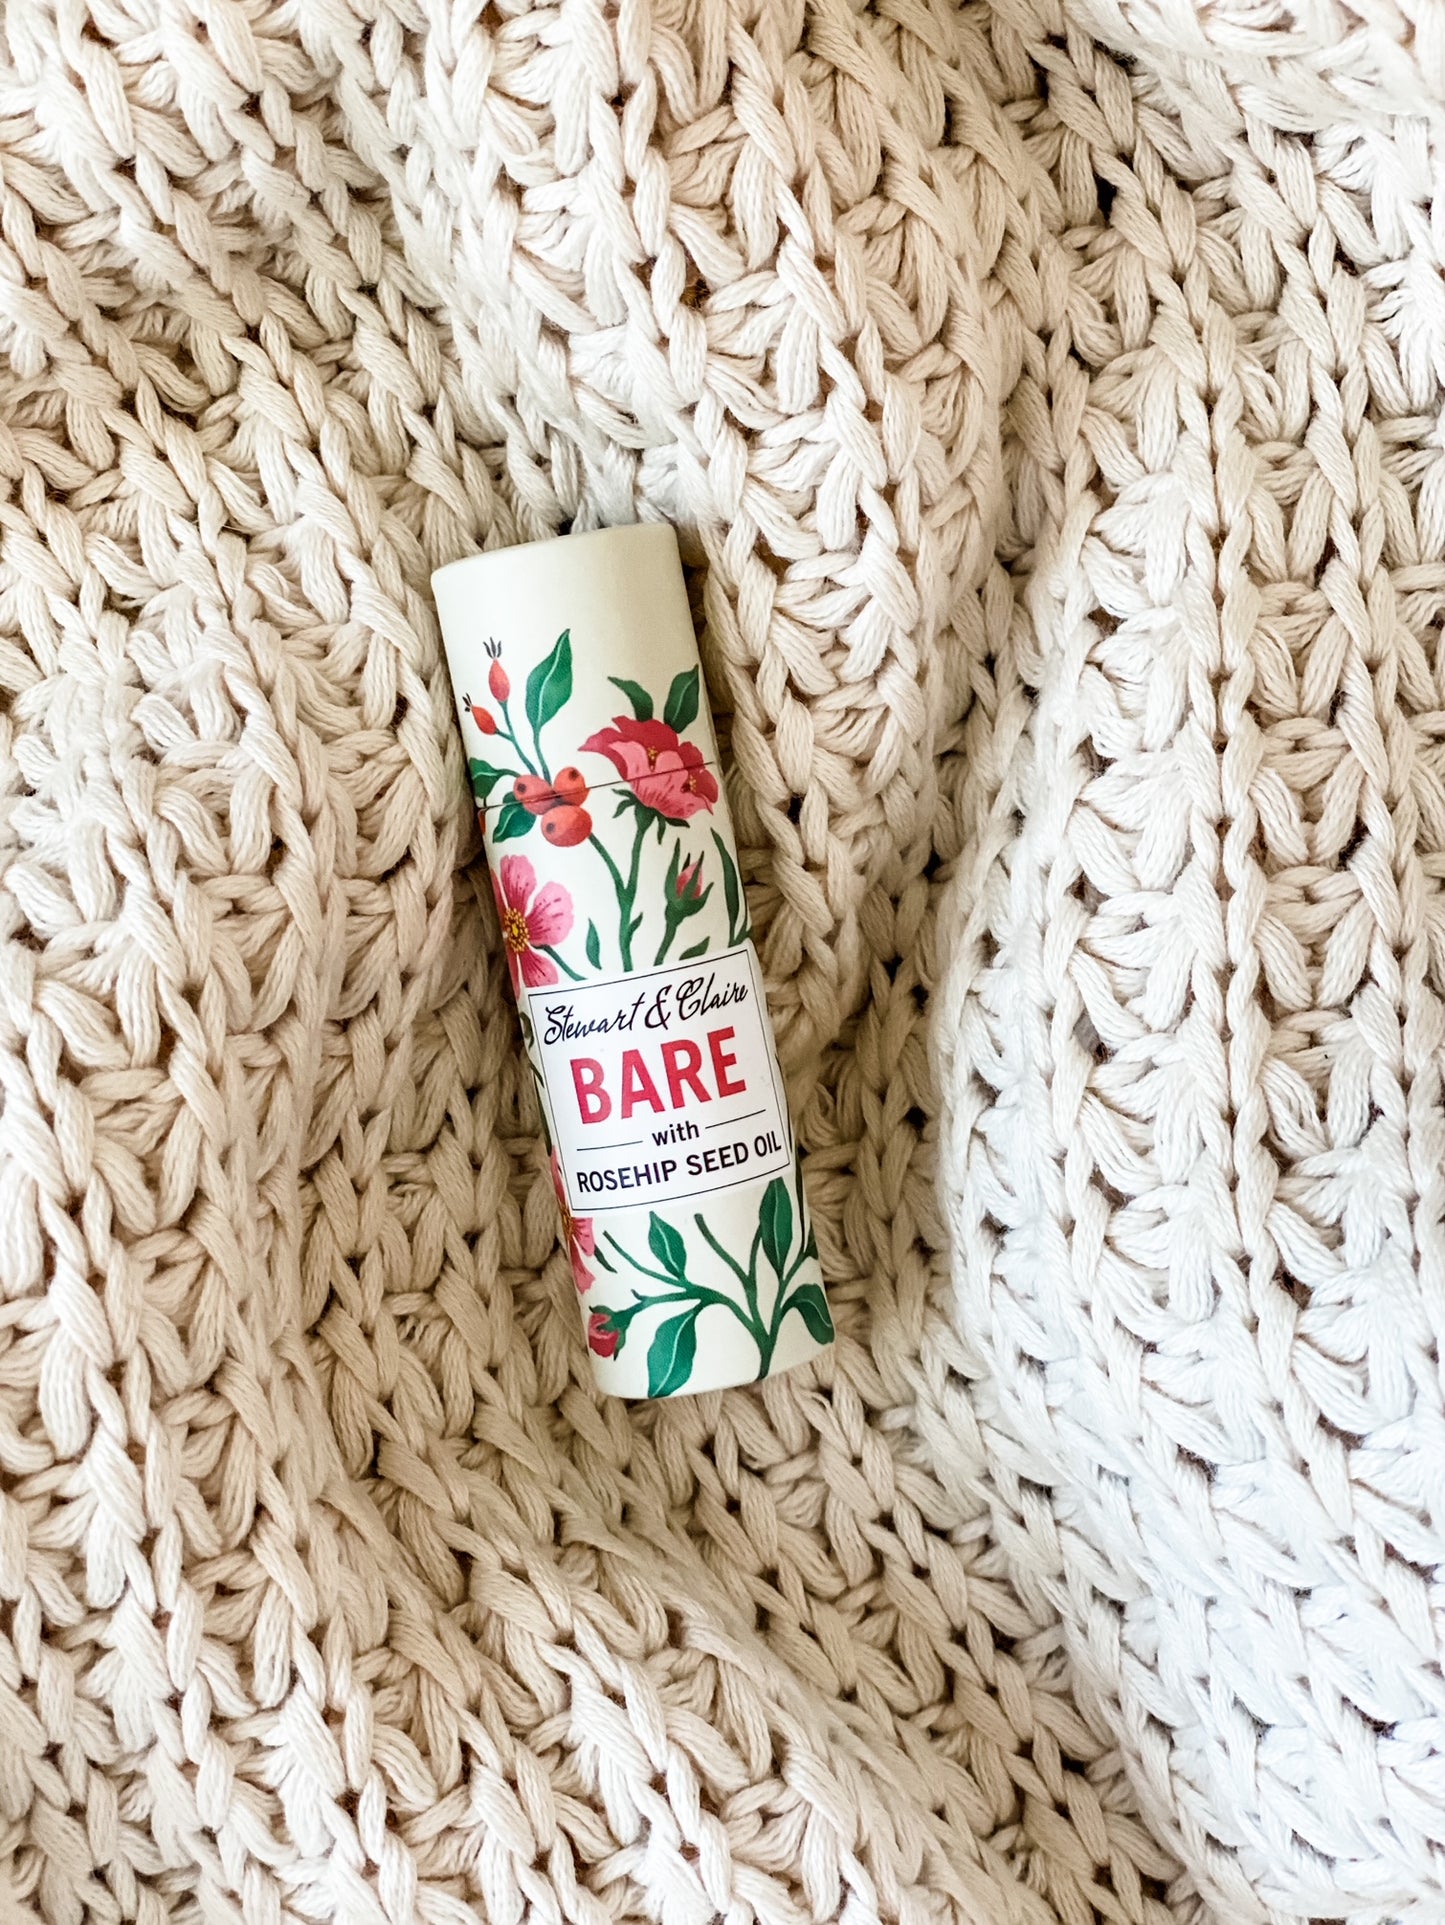 A .3 ounce paperboard tube of lip balm. The tube is off-white with illustrations of roses and rose hips.  There is a white square on the tube with text that shows Stewart & Claire in script. It says Bare it large pink letters then with rosehip seed oil in black letters. It is sitting on a knitted cream-colored blanket.